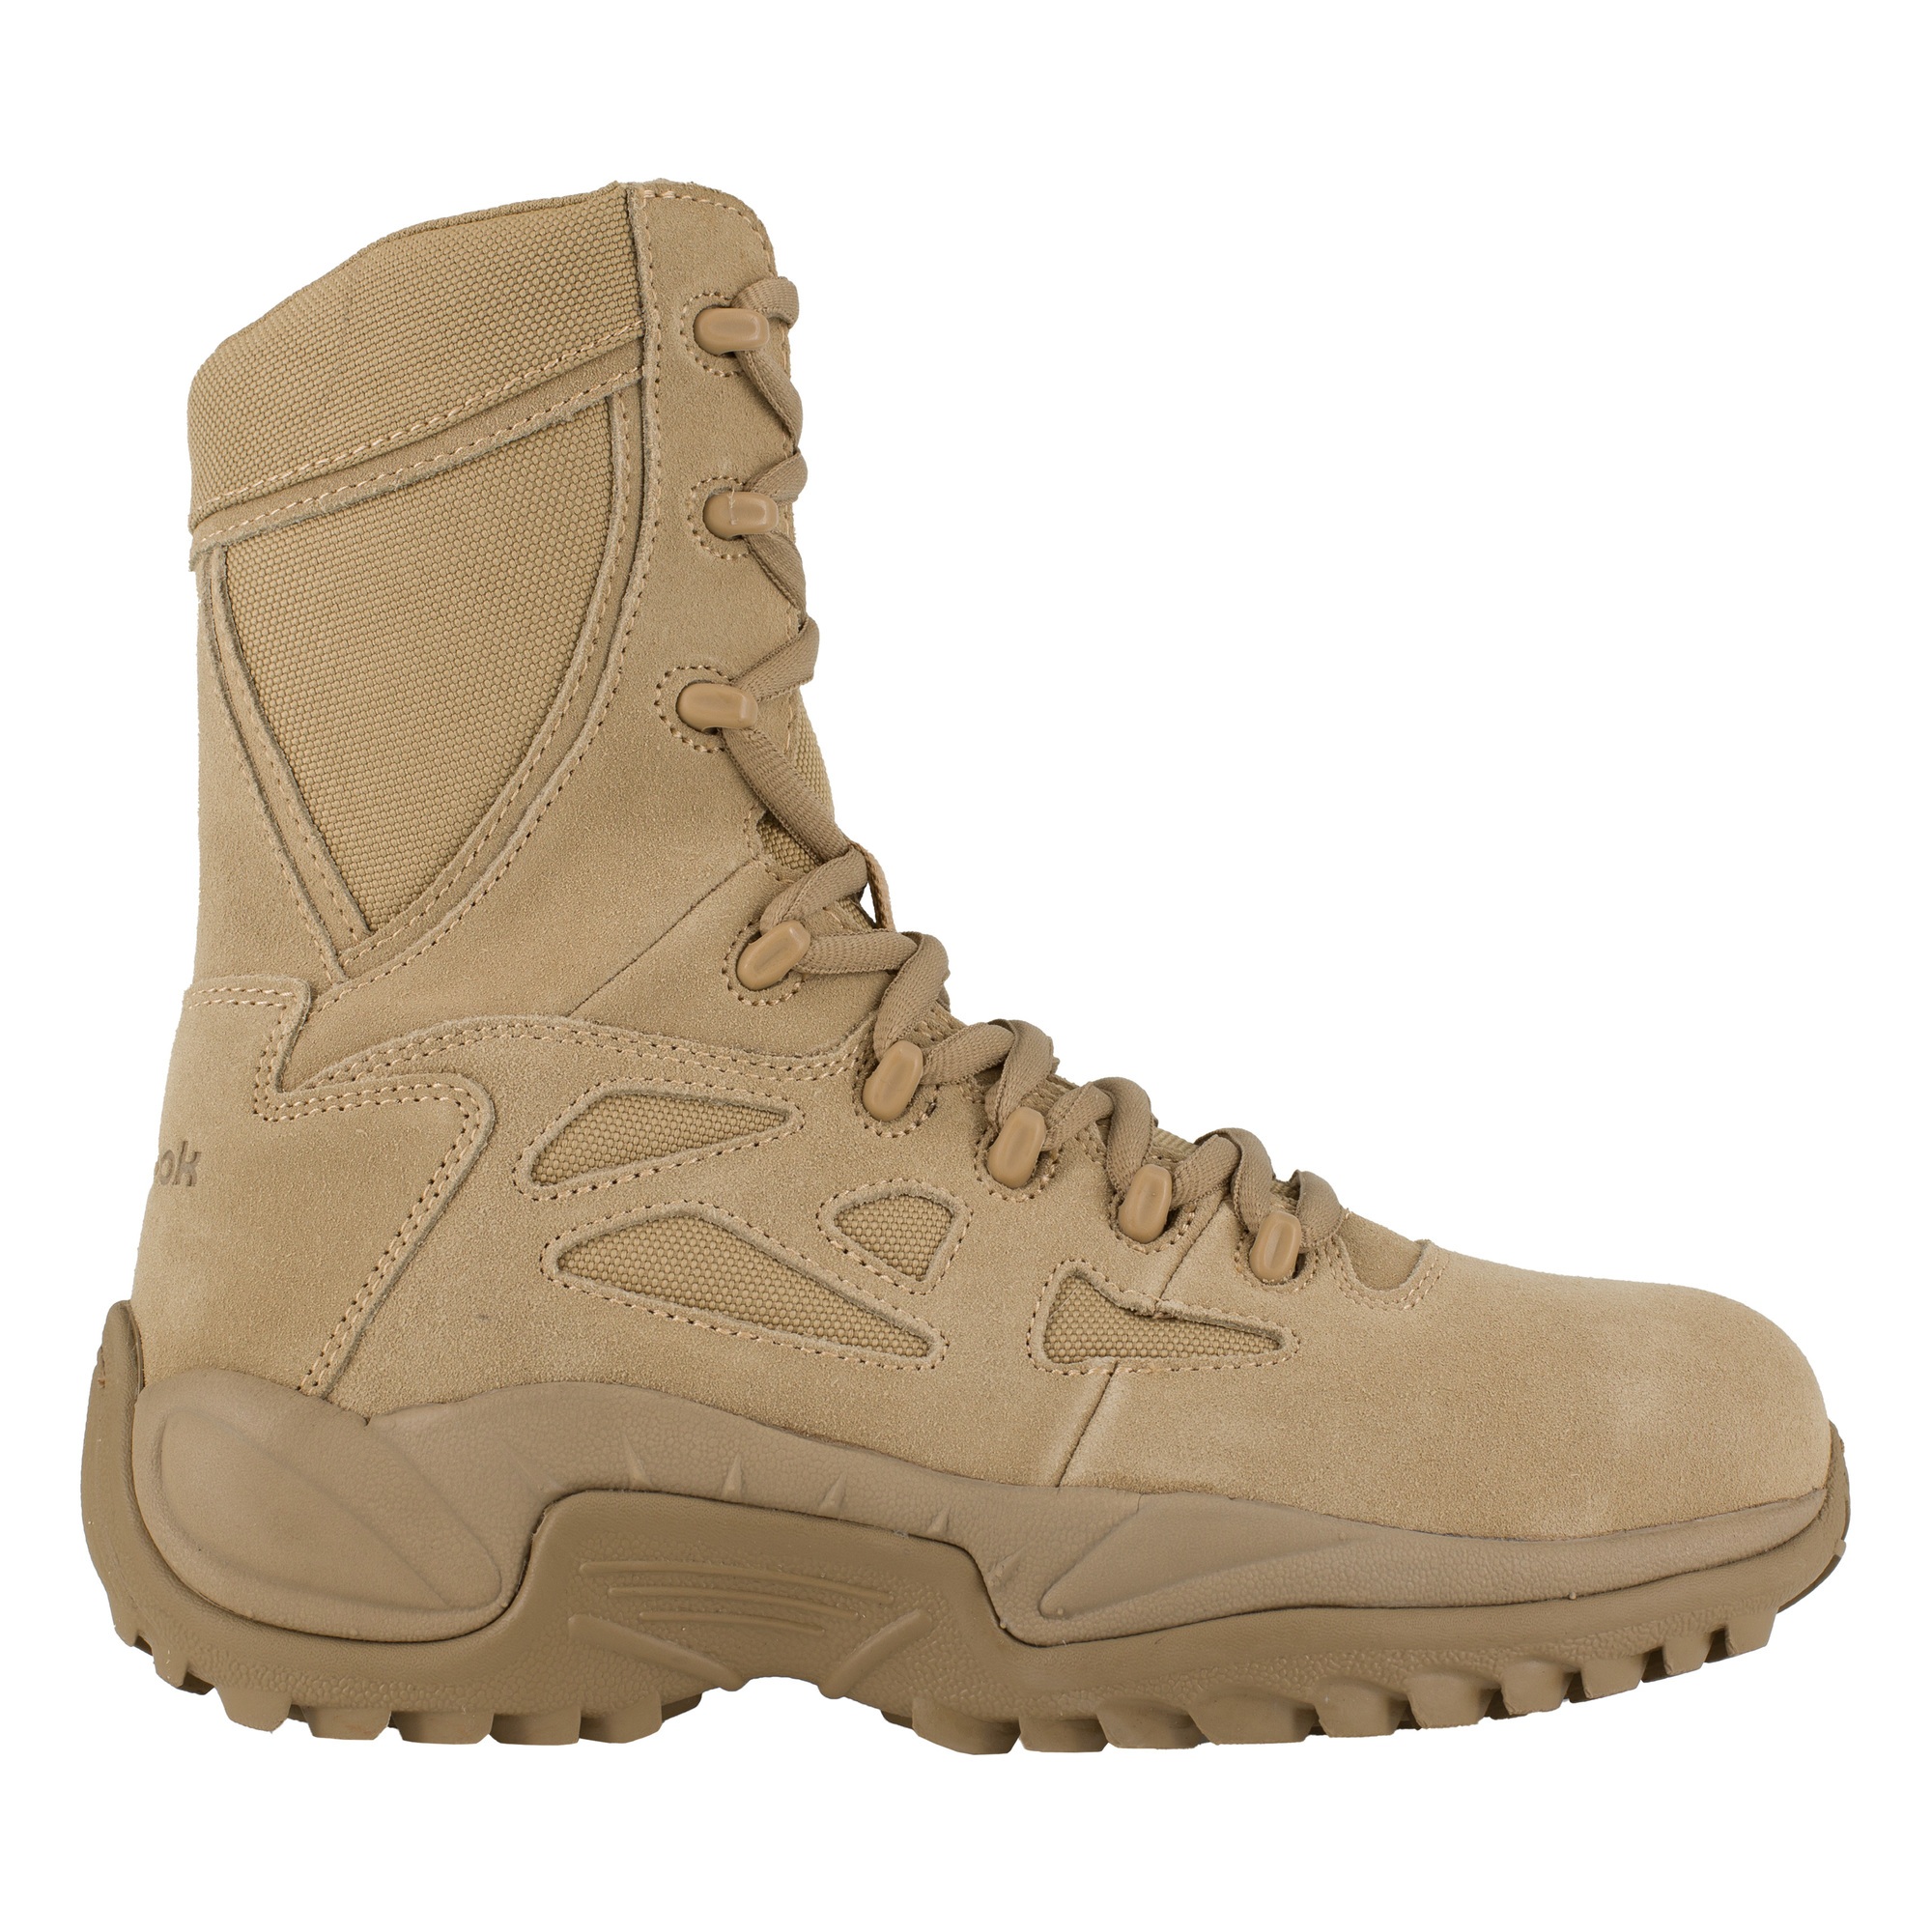 Reebok, 8Inch Stealth Tactical Boot with Side Zipper, Size 8, Width Medium, Color Desert Tan, Model RB894 -  RB894-M-08.0